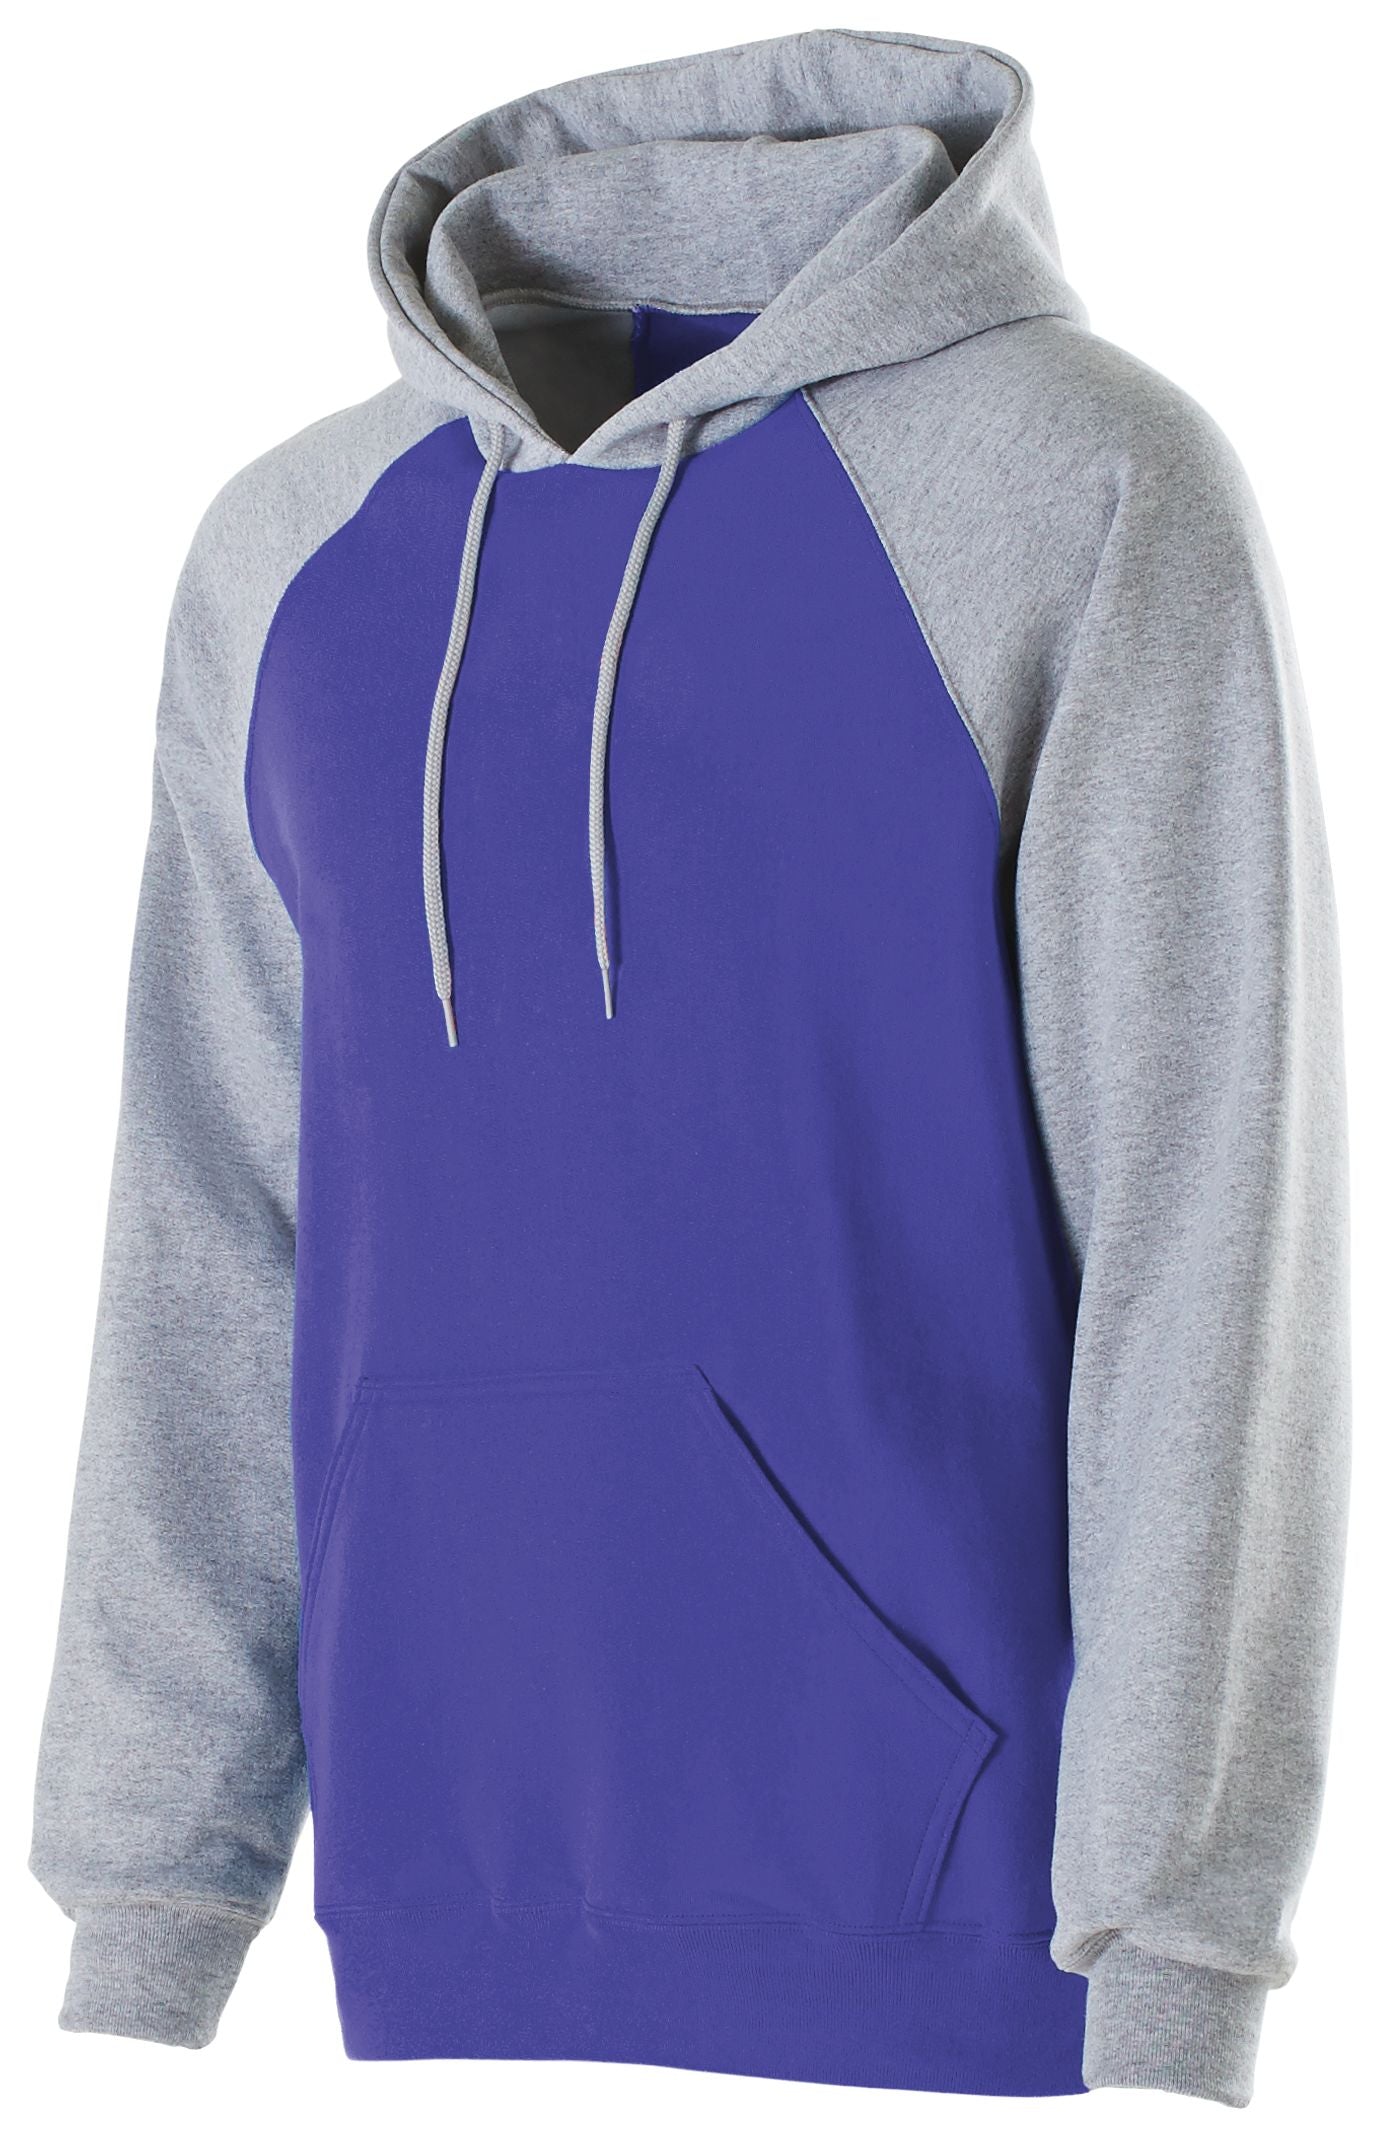 Holloway Banner Hoodie in Purple/Athletic Heather  -Part of the Adult, Adult-Hoodie, Hoodies, Holloway product lines at KanaleyCreations.com